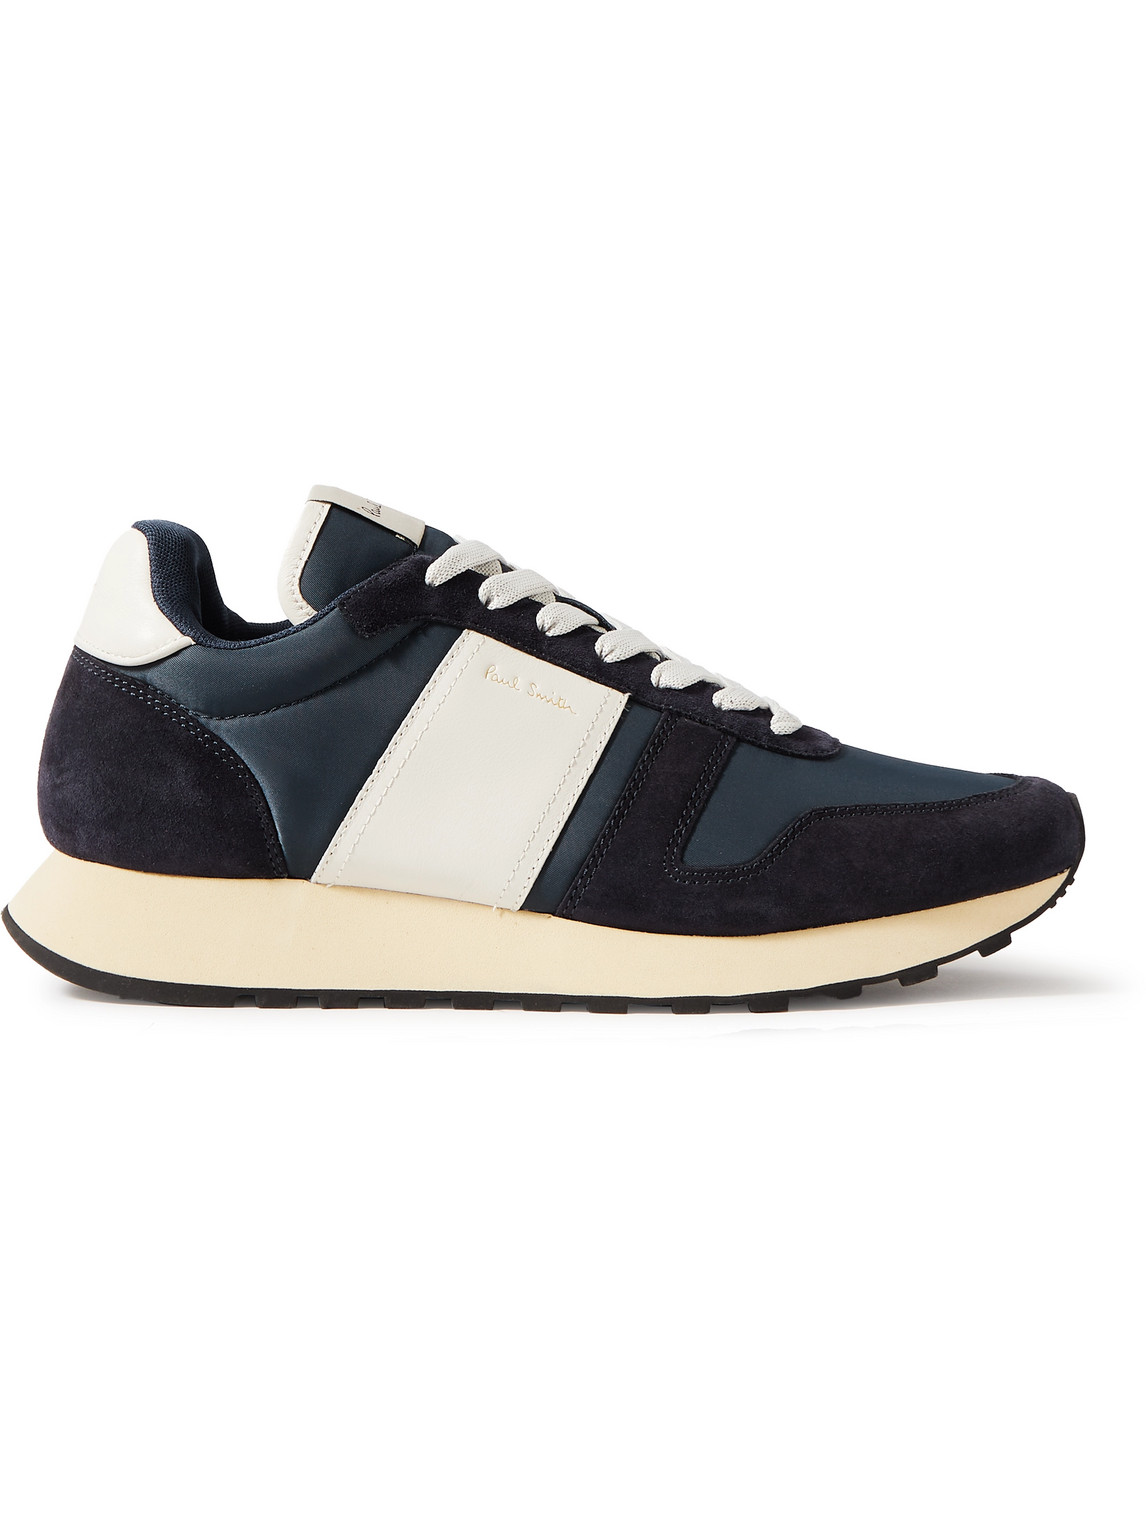 Paul Smith Eighties Suede And Leather Sneakers In Blue